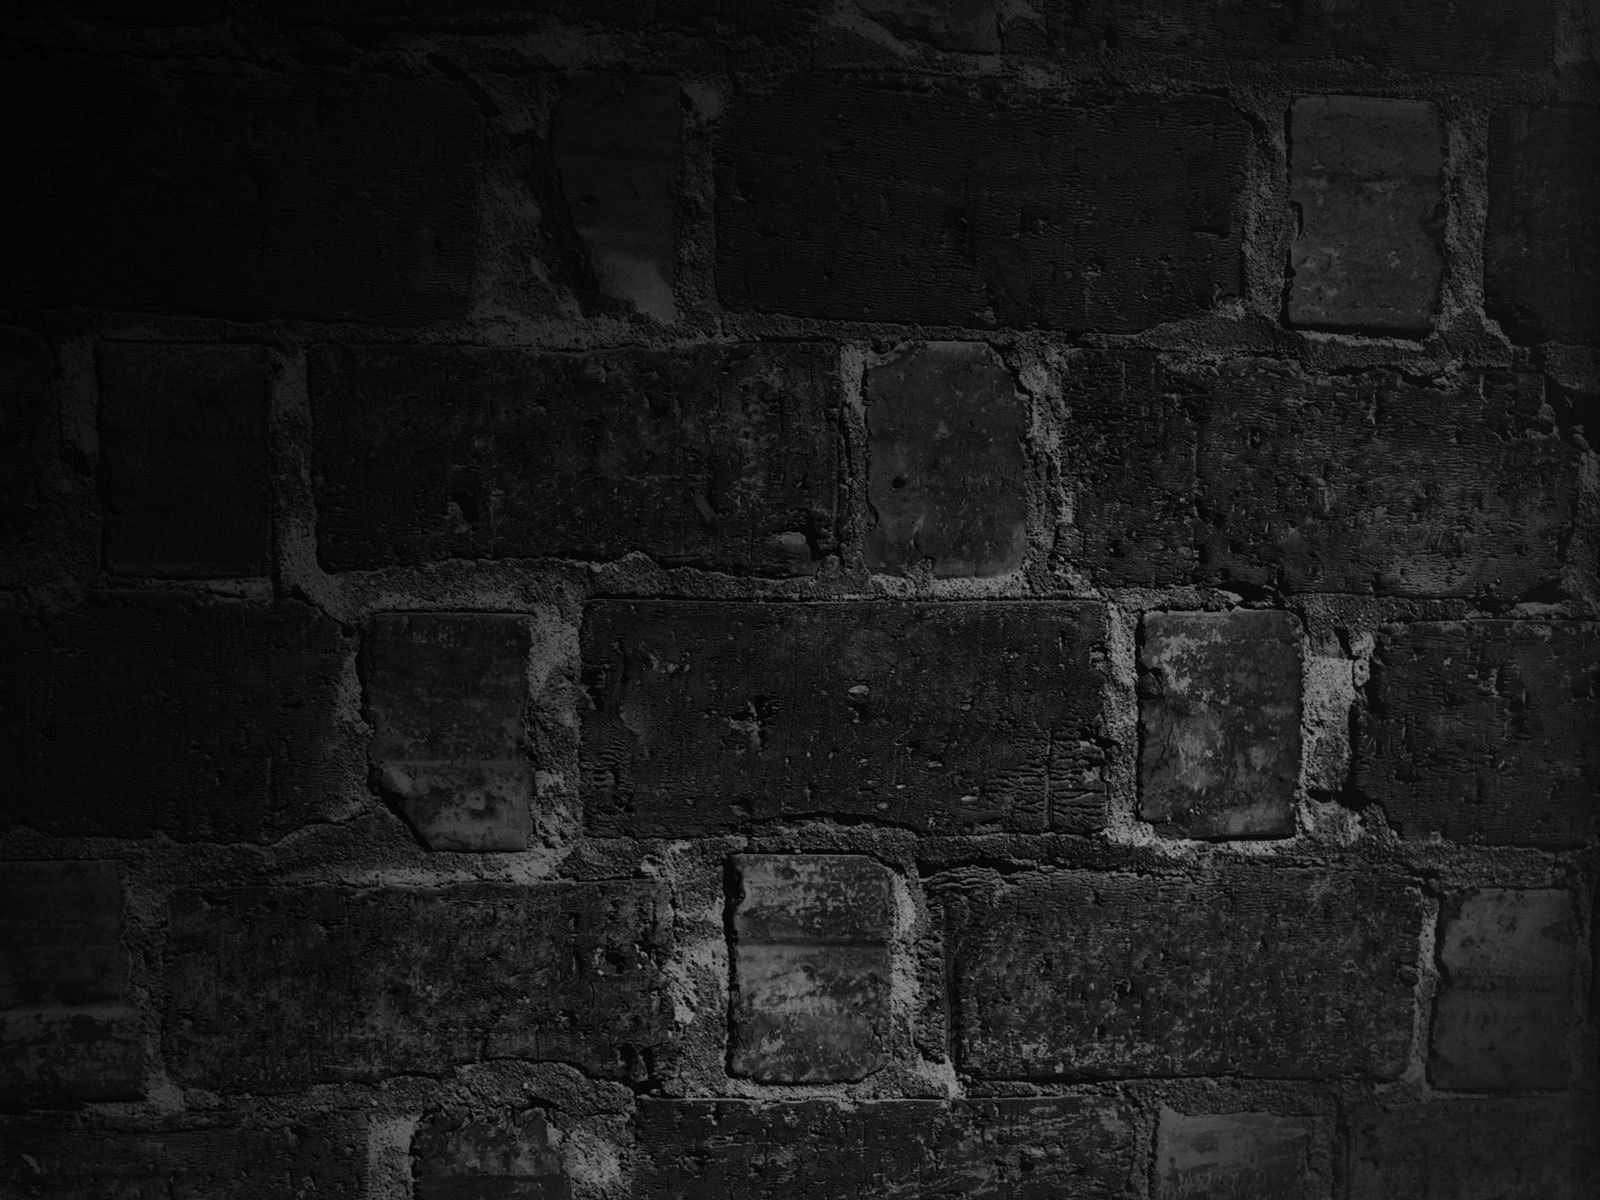 Download wallpaper 1600x1200 wall, brick, texture, shadow, black and white  standard 4:3 hd background